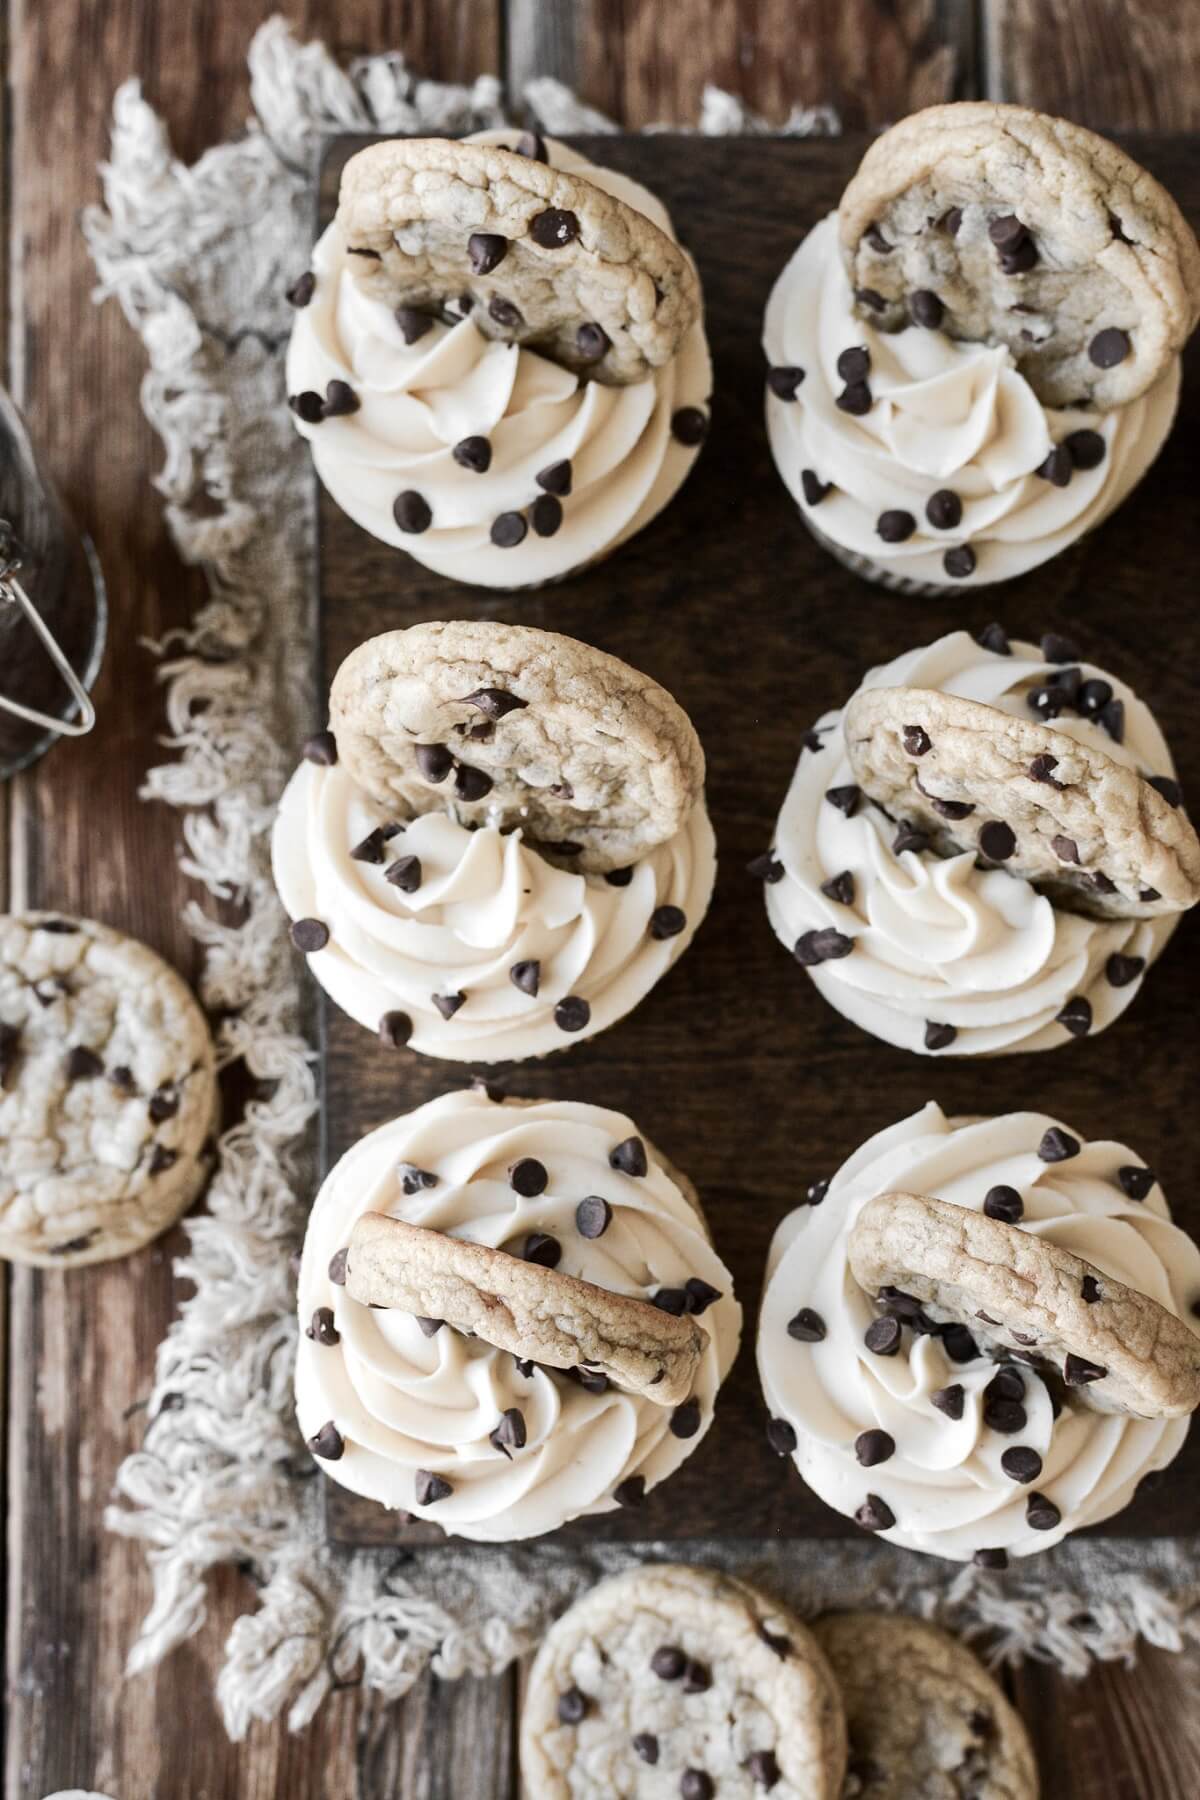 Chocolate chip cupcakes topped with cookies.